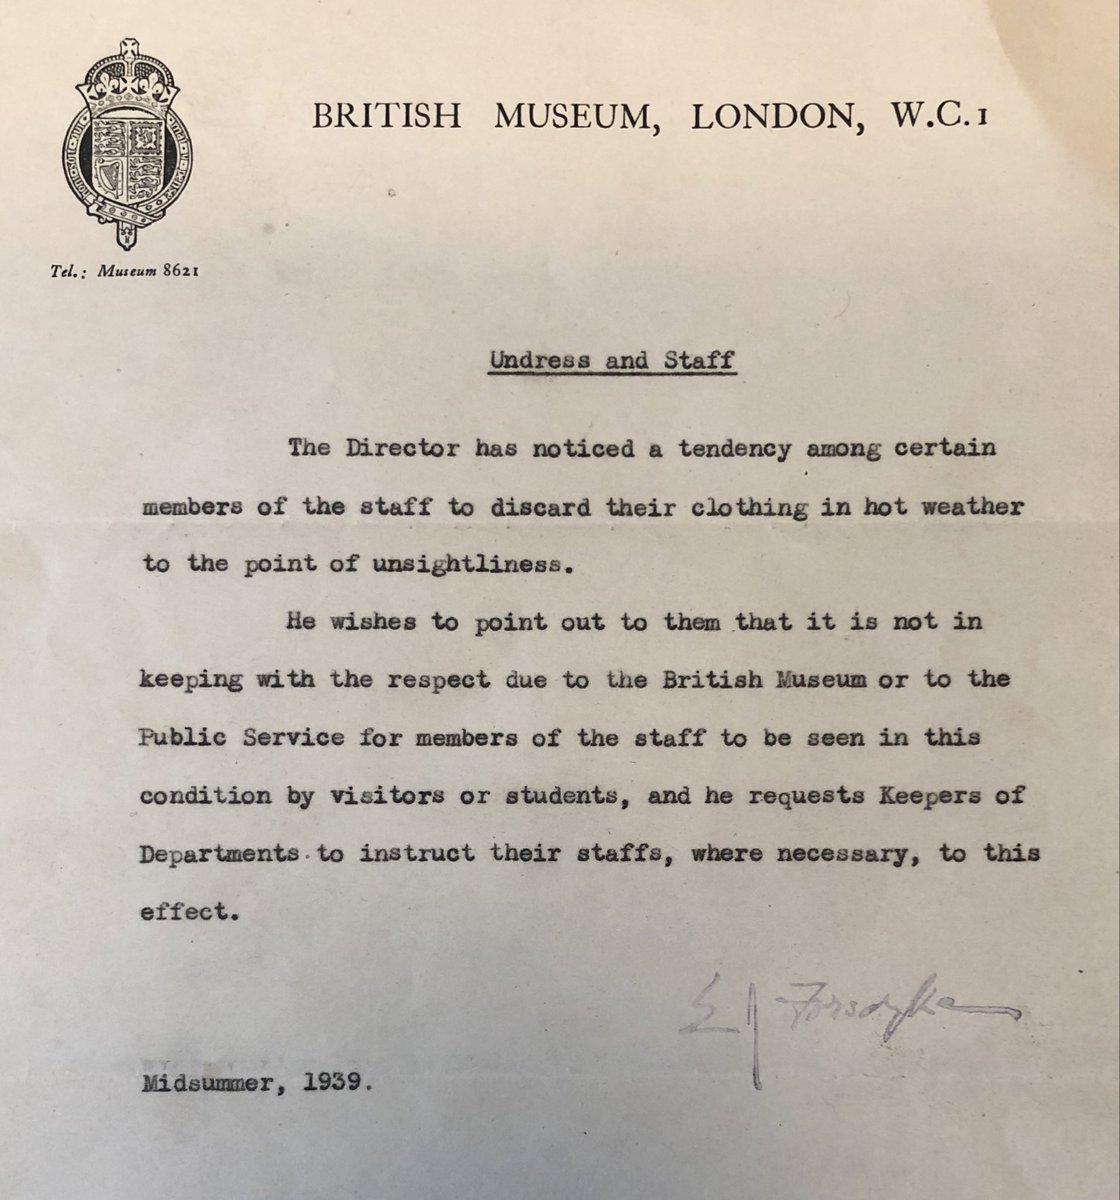 #Archive30 #ArchiveAdvice The Director of the @britishmuseum, Sir (Edgar) John Forsdyke,  felt compelled to write a memo to all staff in 1939 advising them to dress more appropriately in the hot weather…! #BritishMuseum #archives